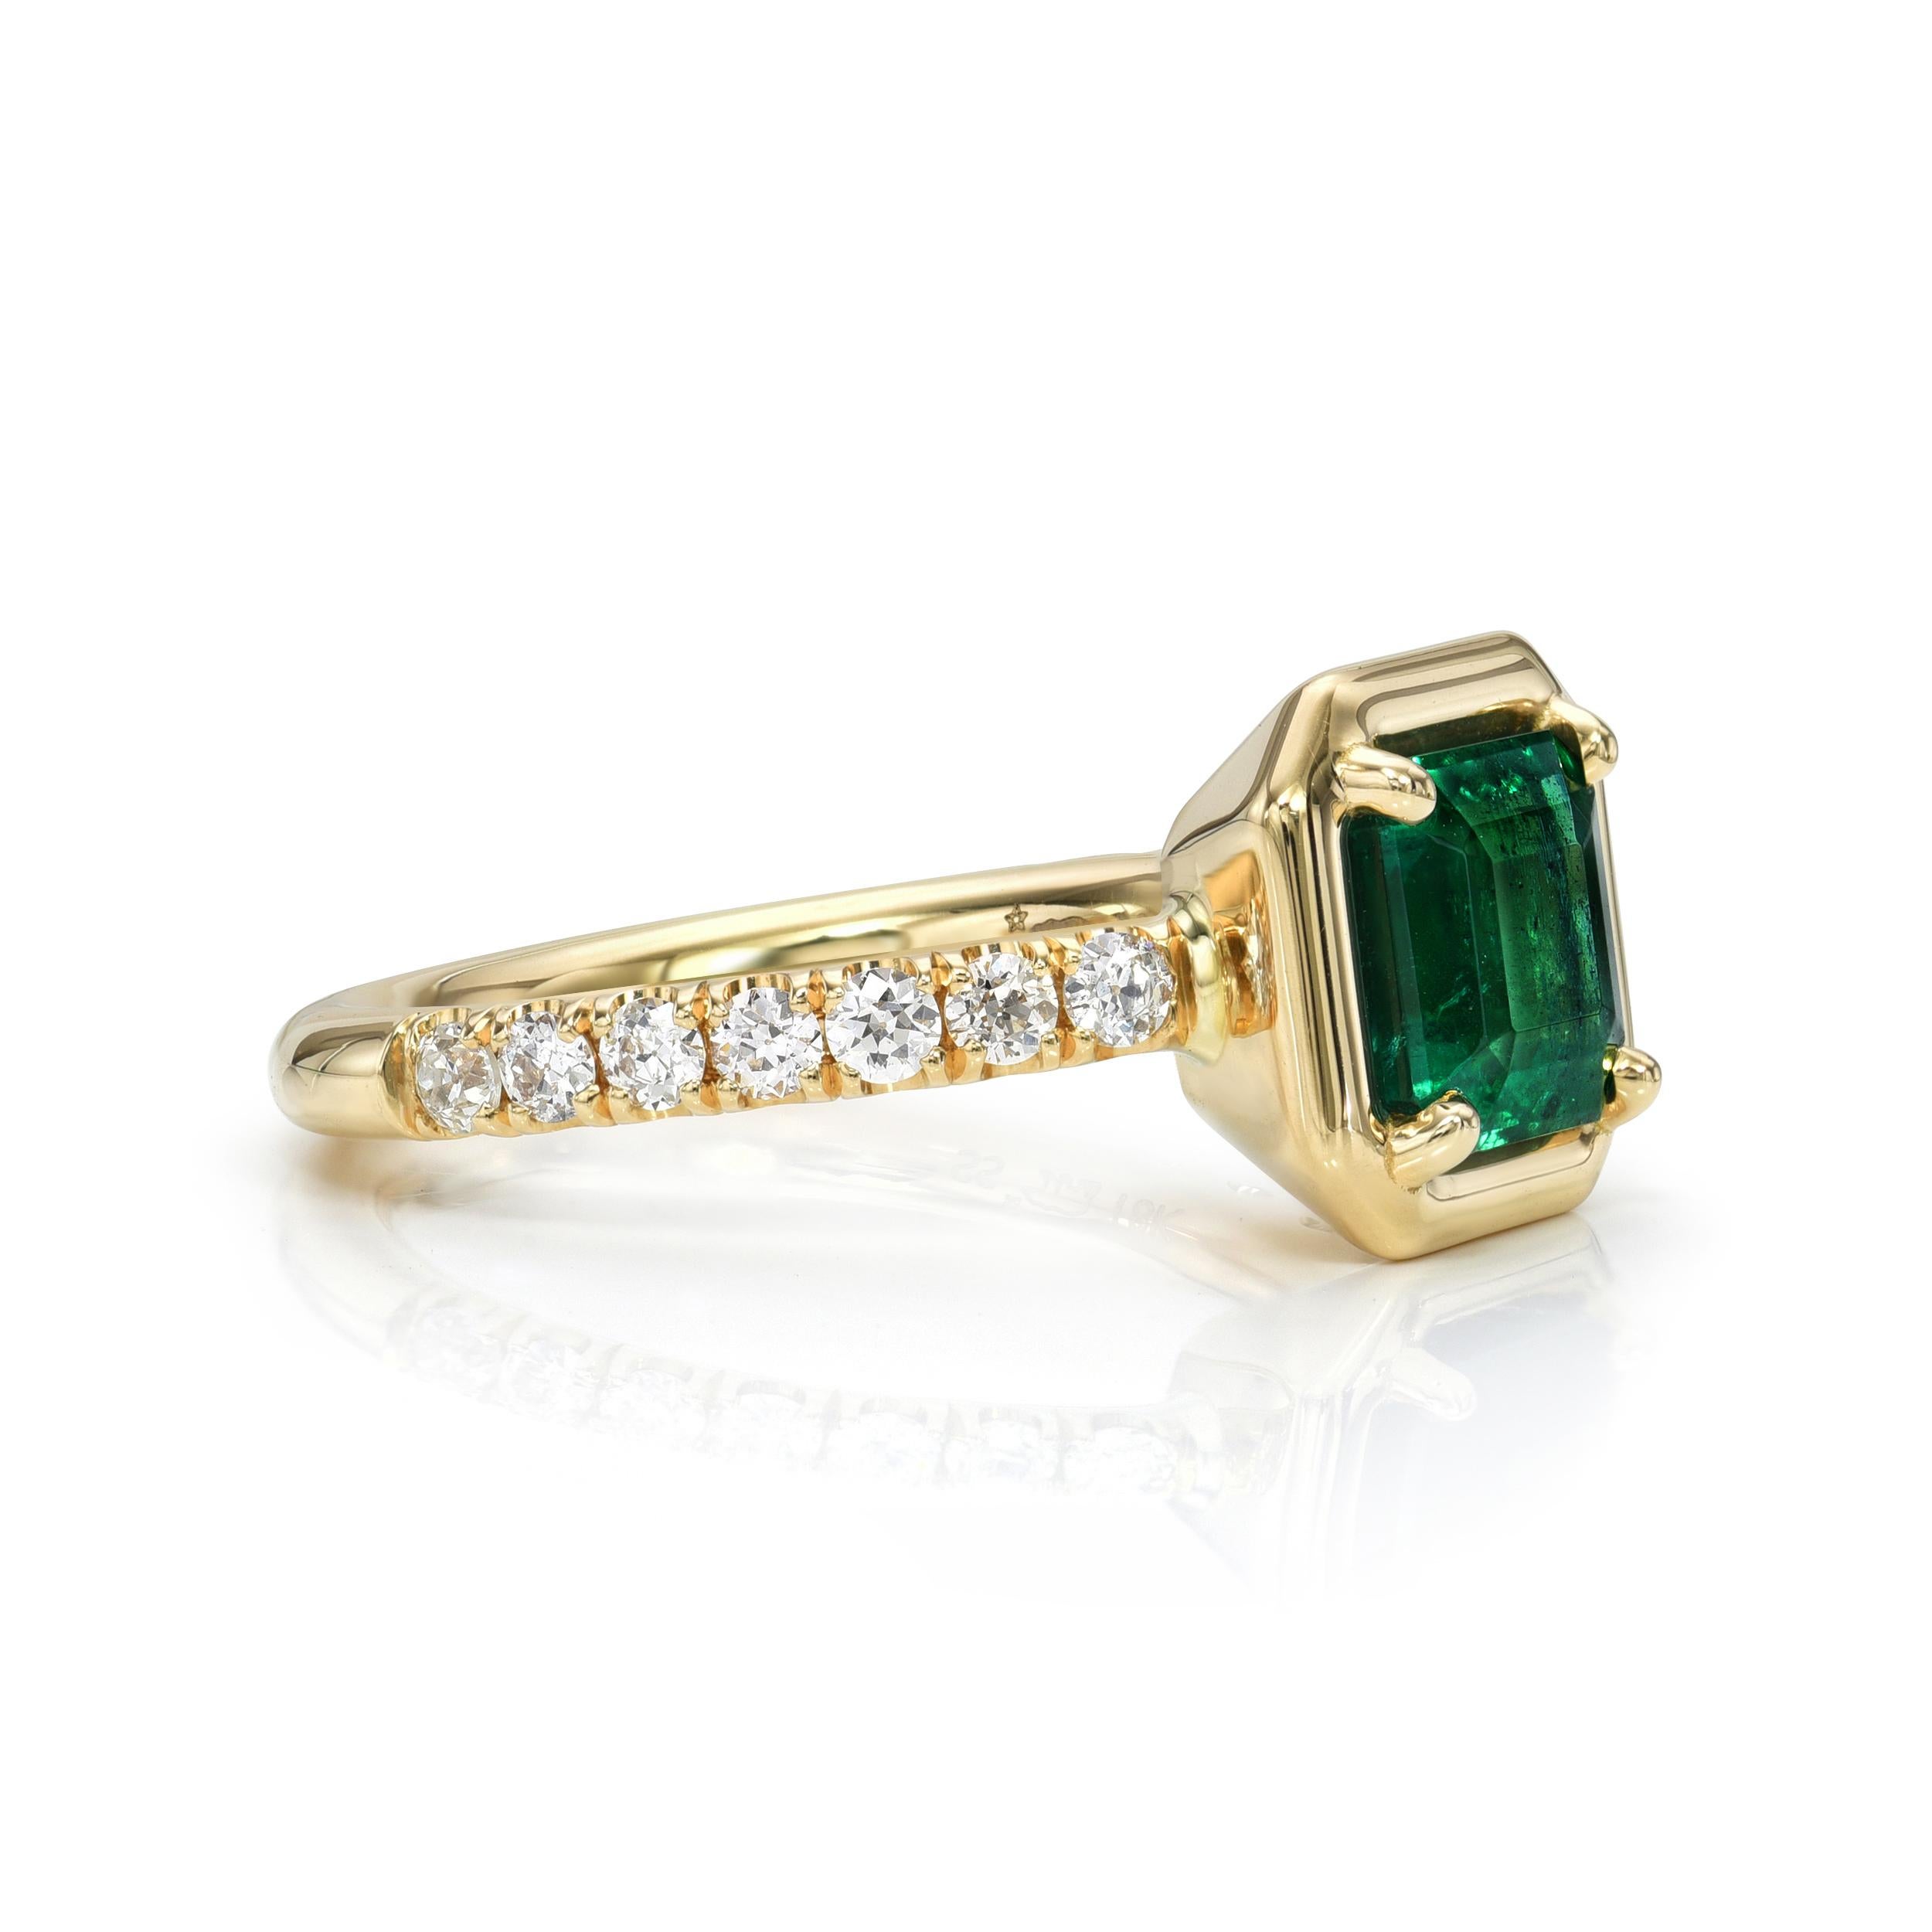 1.69ct GIA certified Zambian Asscher cut green emerald with 0.40ctw old European cut accent diamonds prong set in a handcrafted 18K yellow gold mounting.